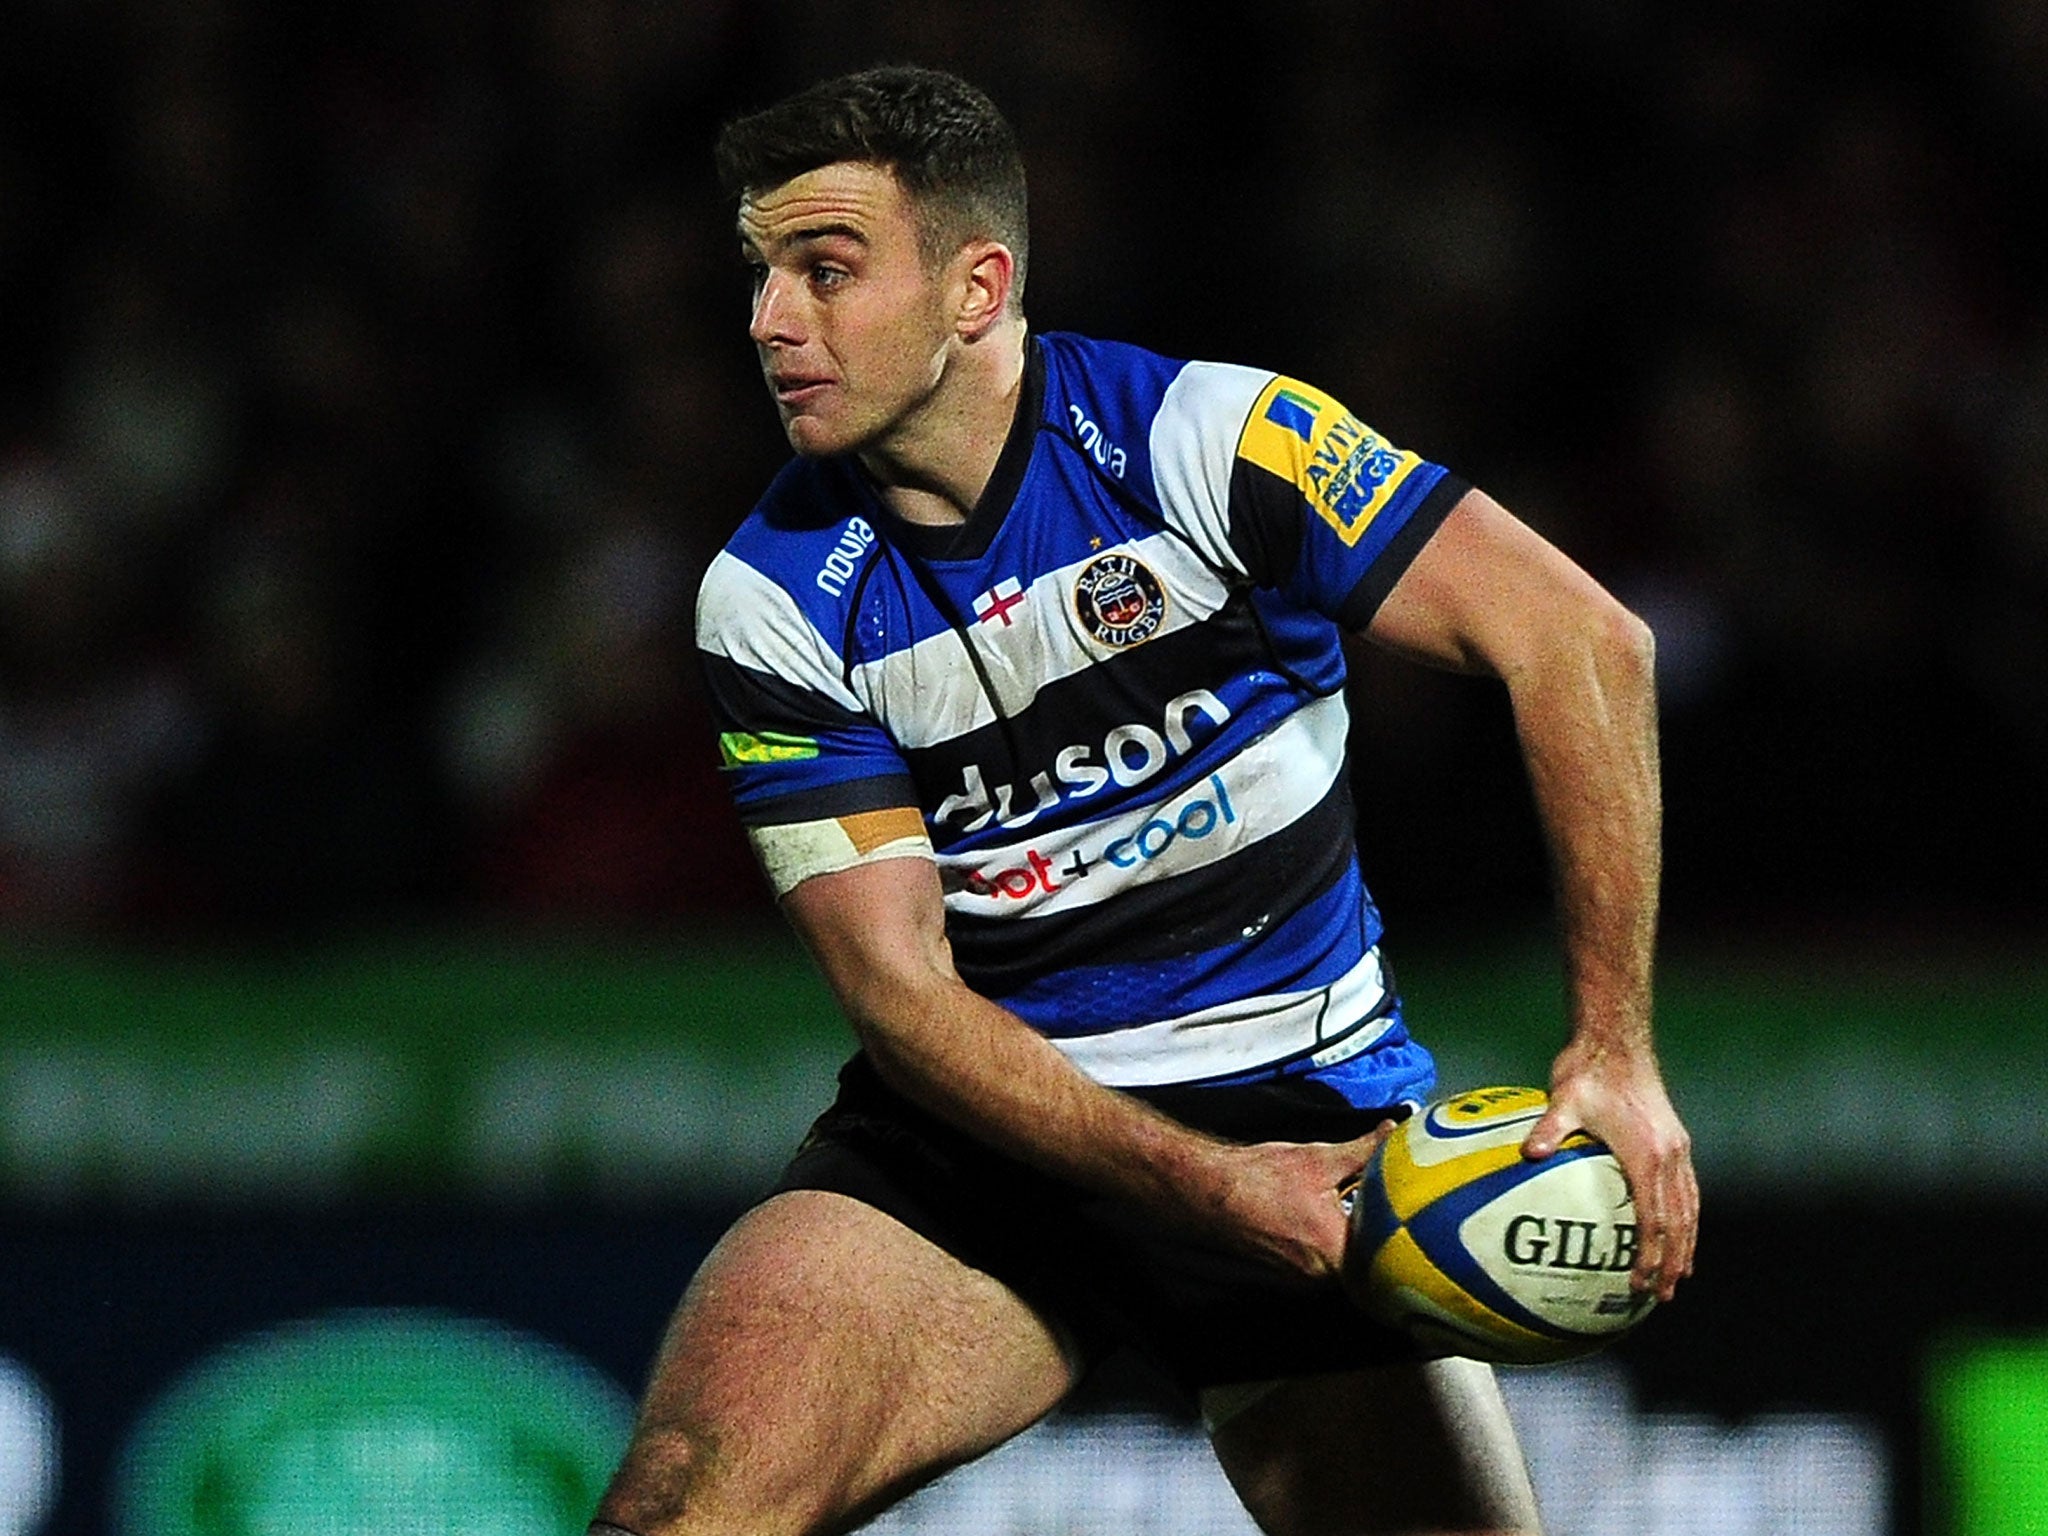 George Ford in action for Bath on Saturday